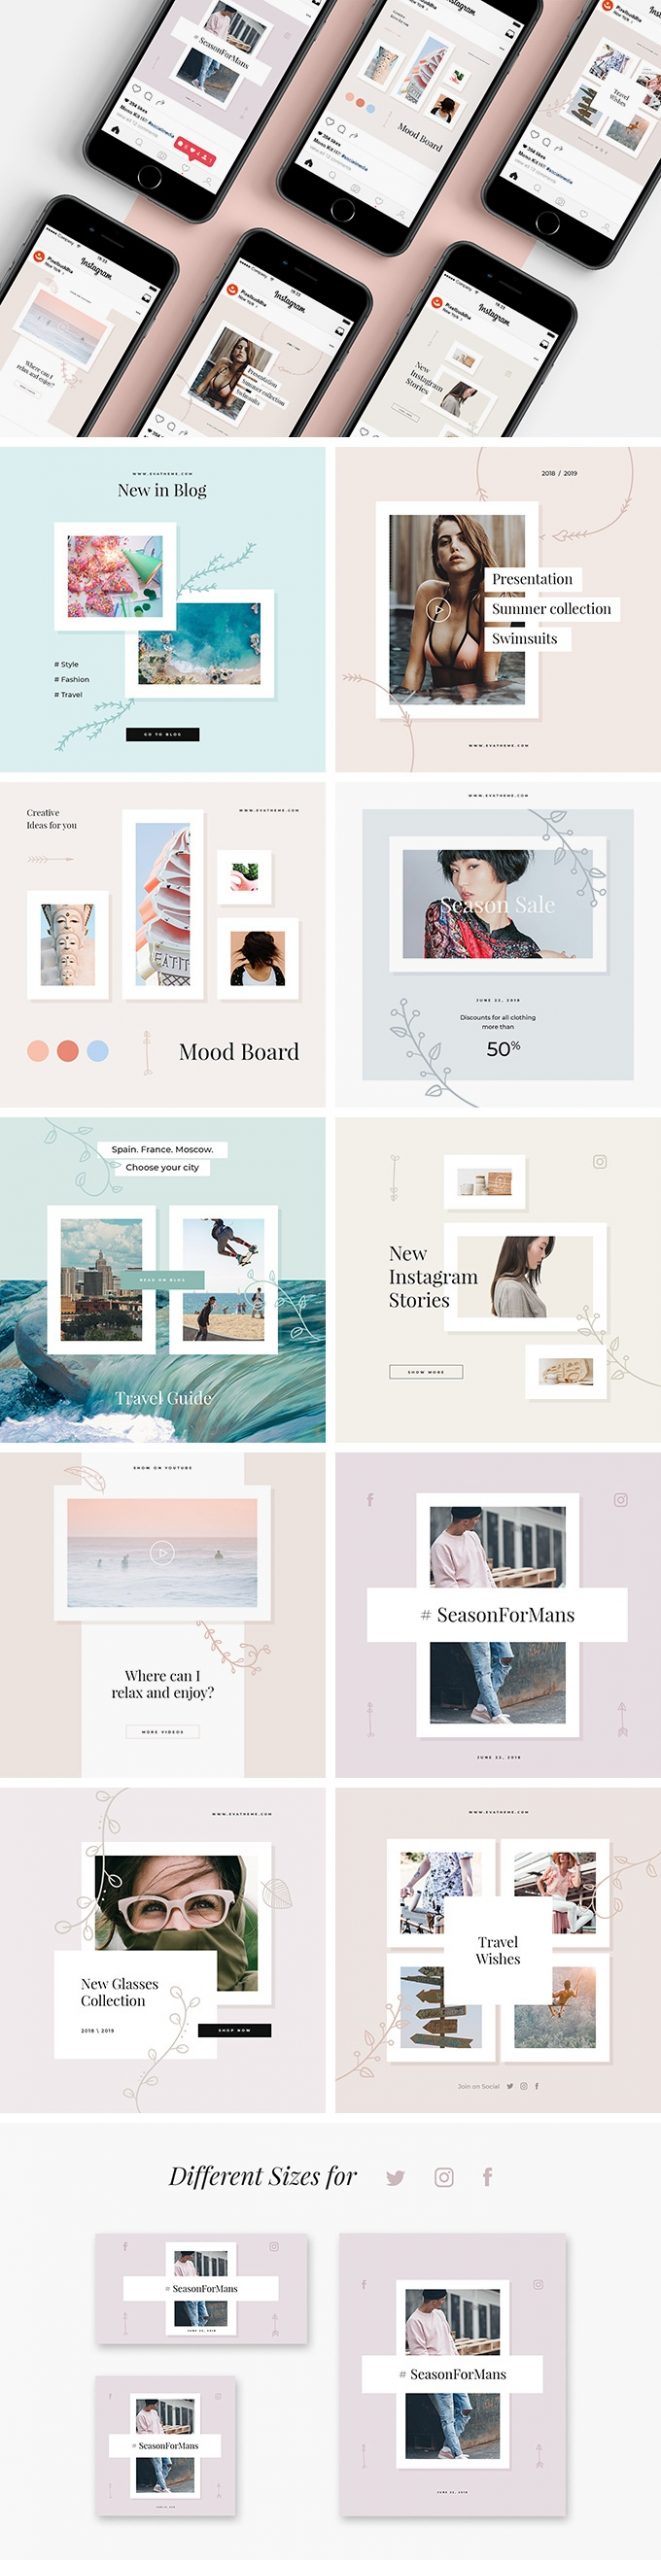 Elly Instagram Templates Free Download